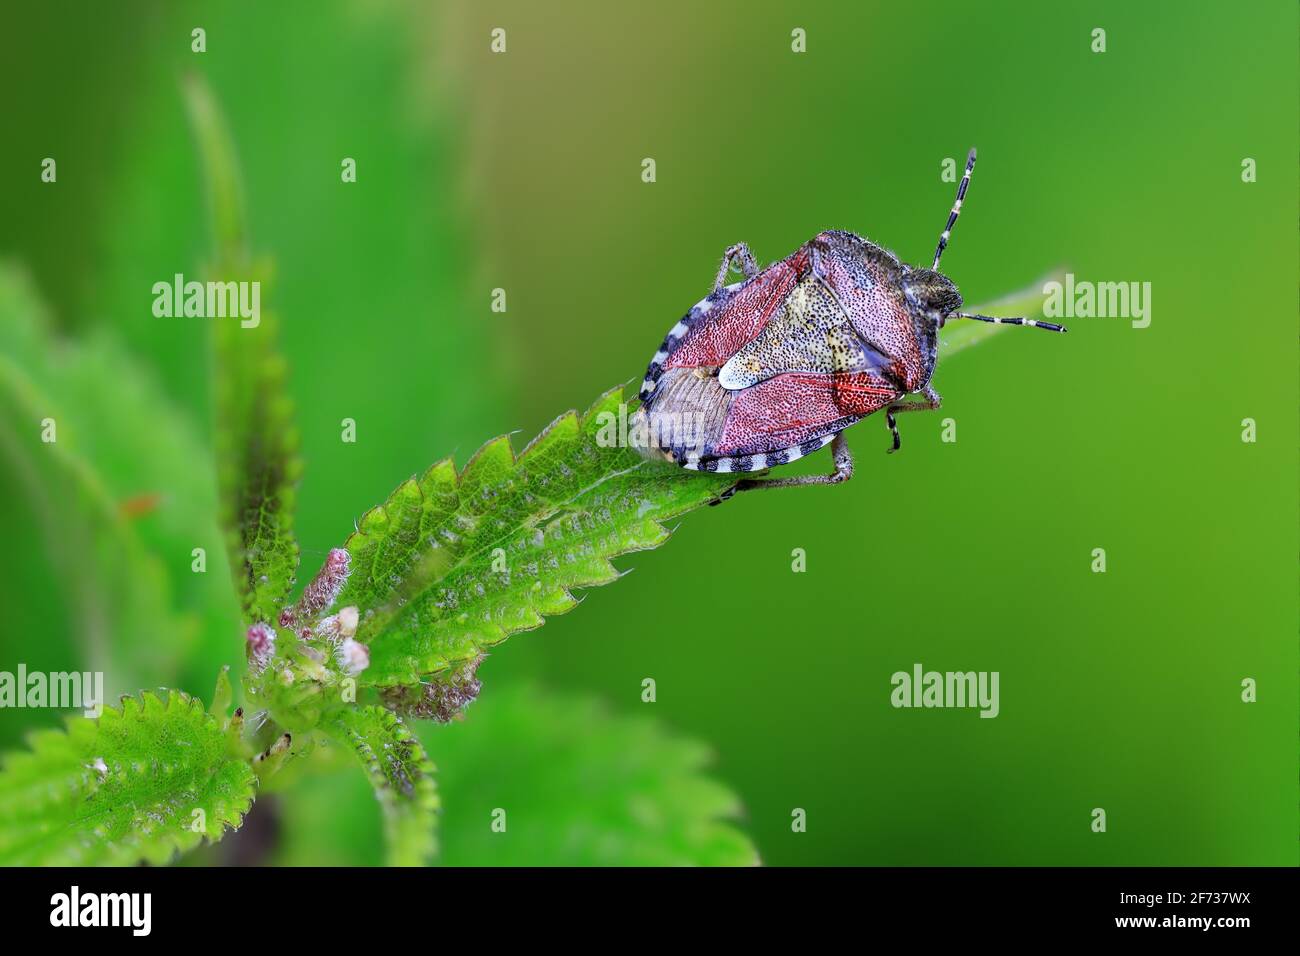 True bug (Heteroptera) sitting on leaf, insects, Hinwil, Switzerland Stock Photo